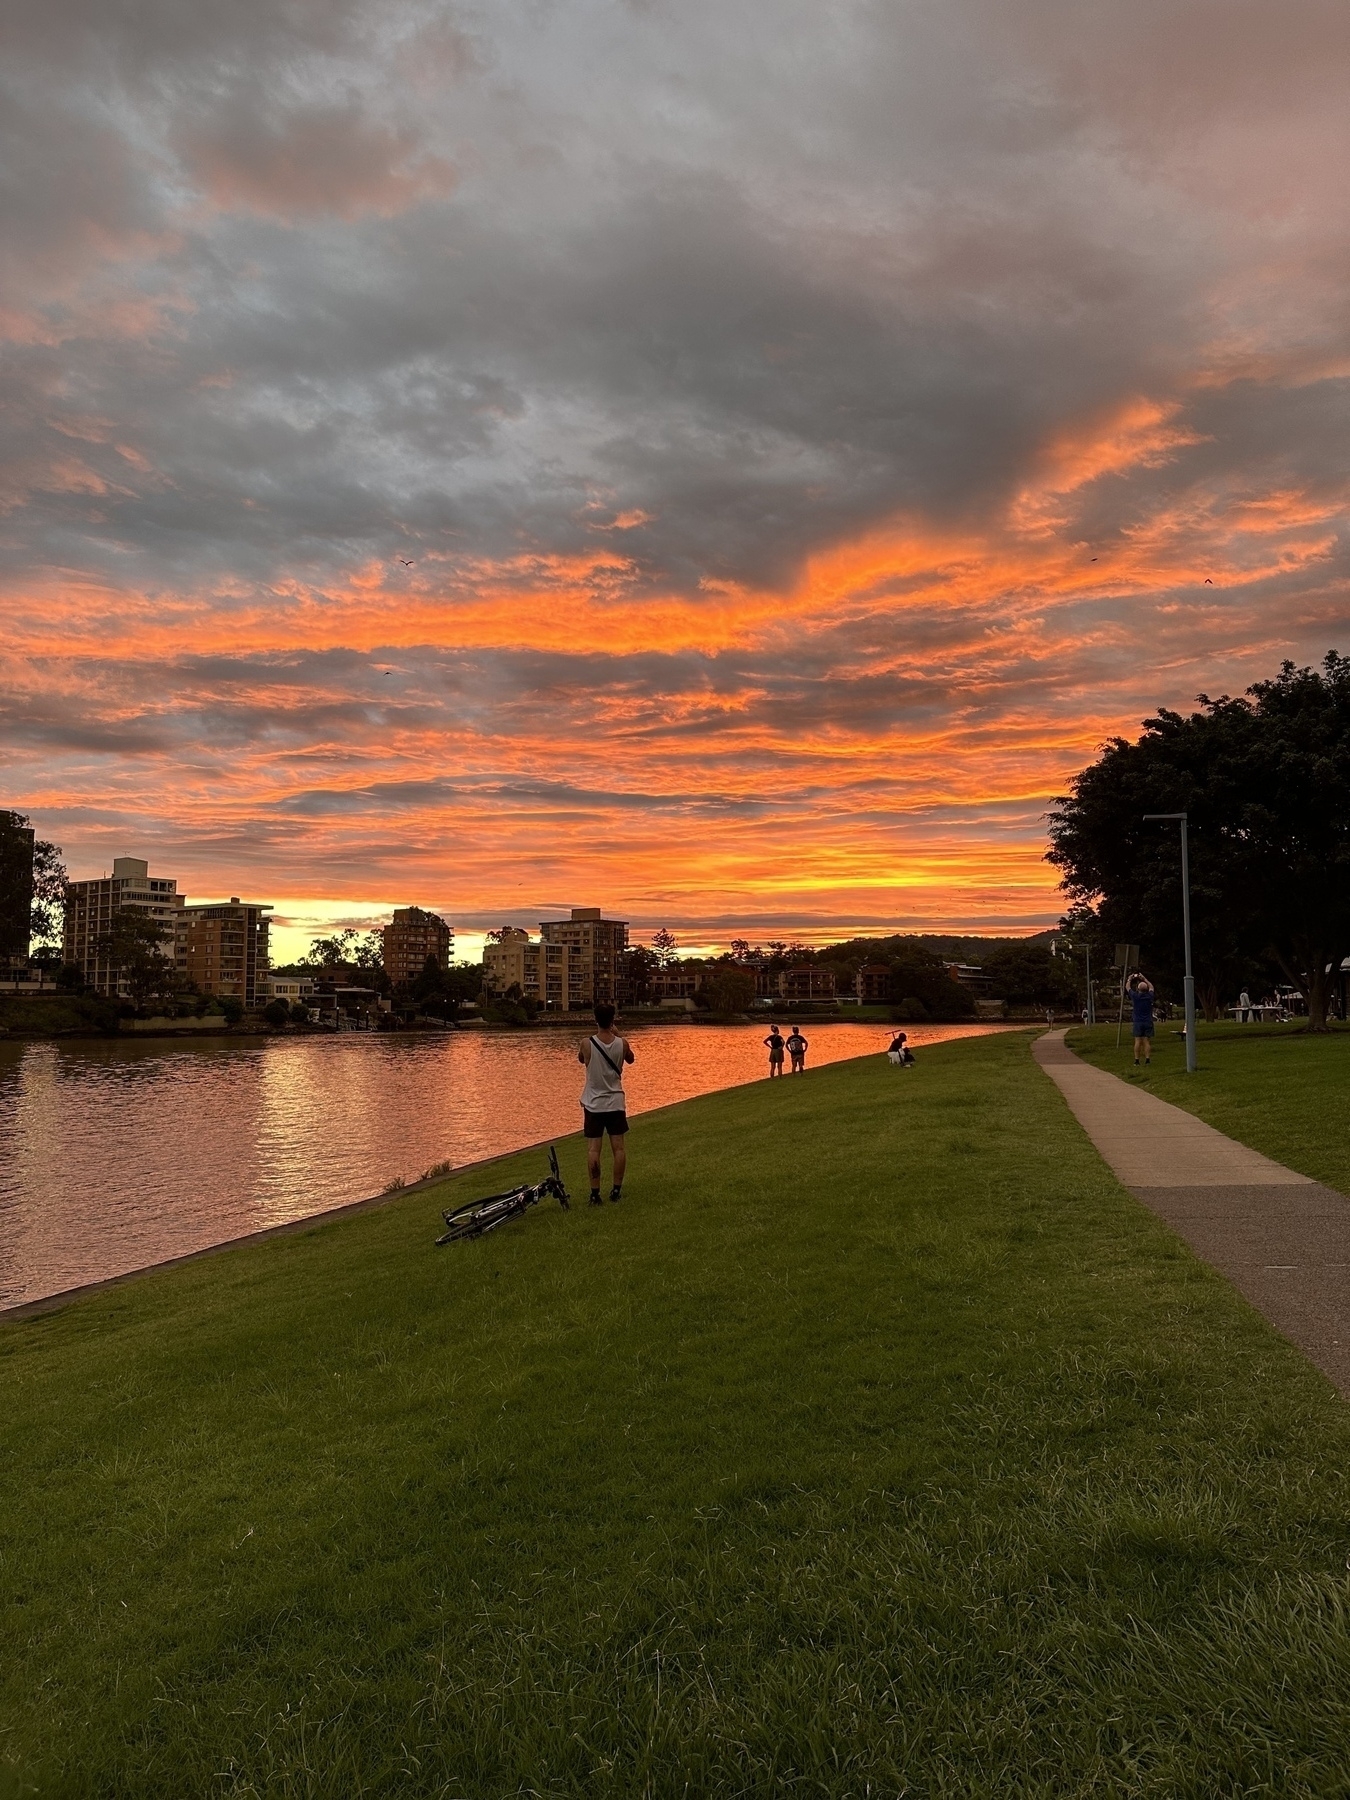 A length of green grass and a cement path in the foreground. A river curving from left to right. On the other side of the river the silhouettes of apartment buildings are visible. Above those is a cloudy sky lit up in a vibrant orange by the setting sun.